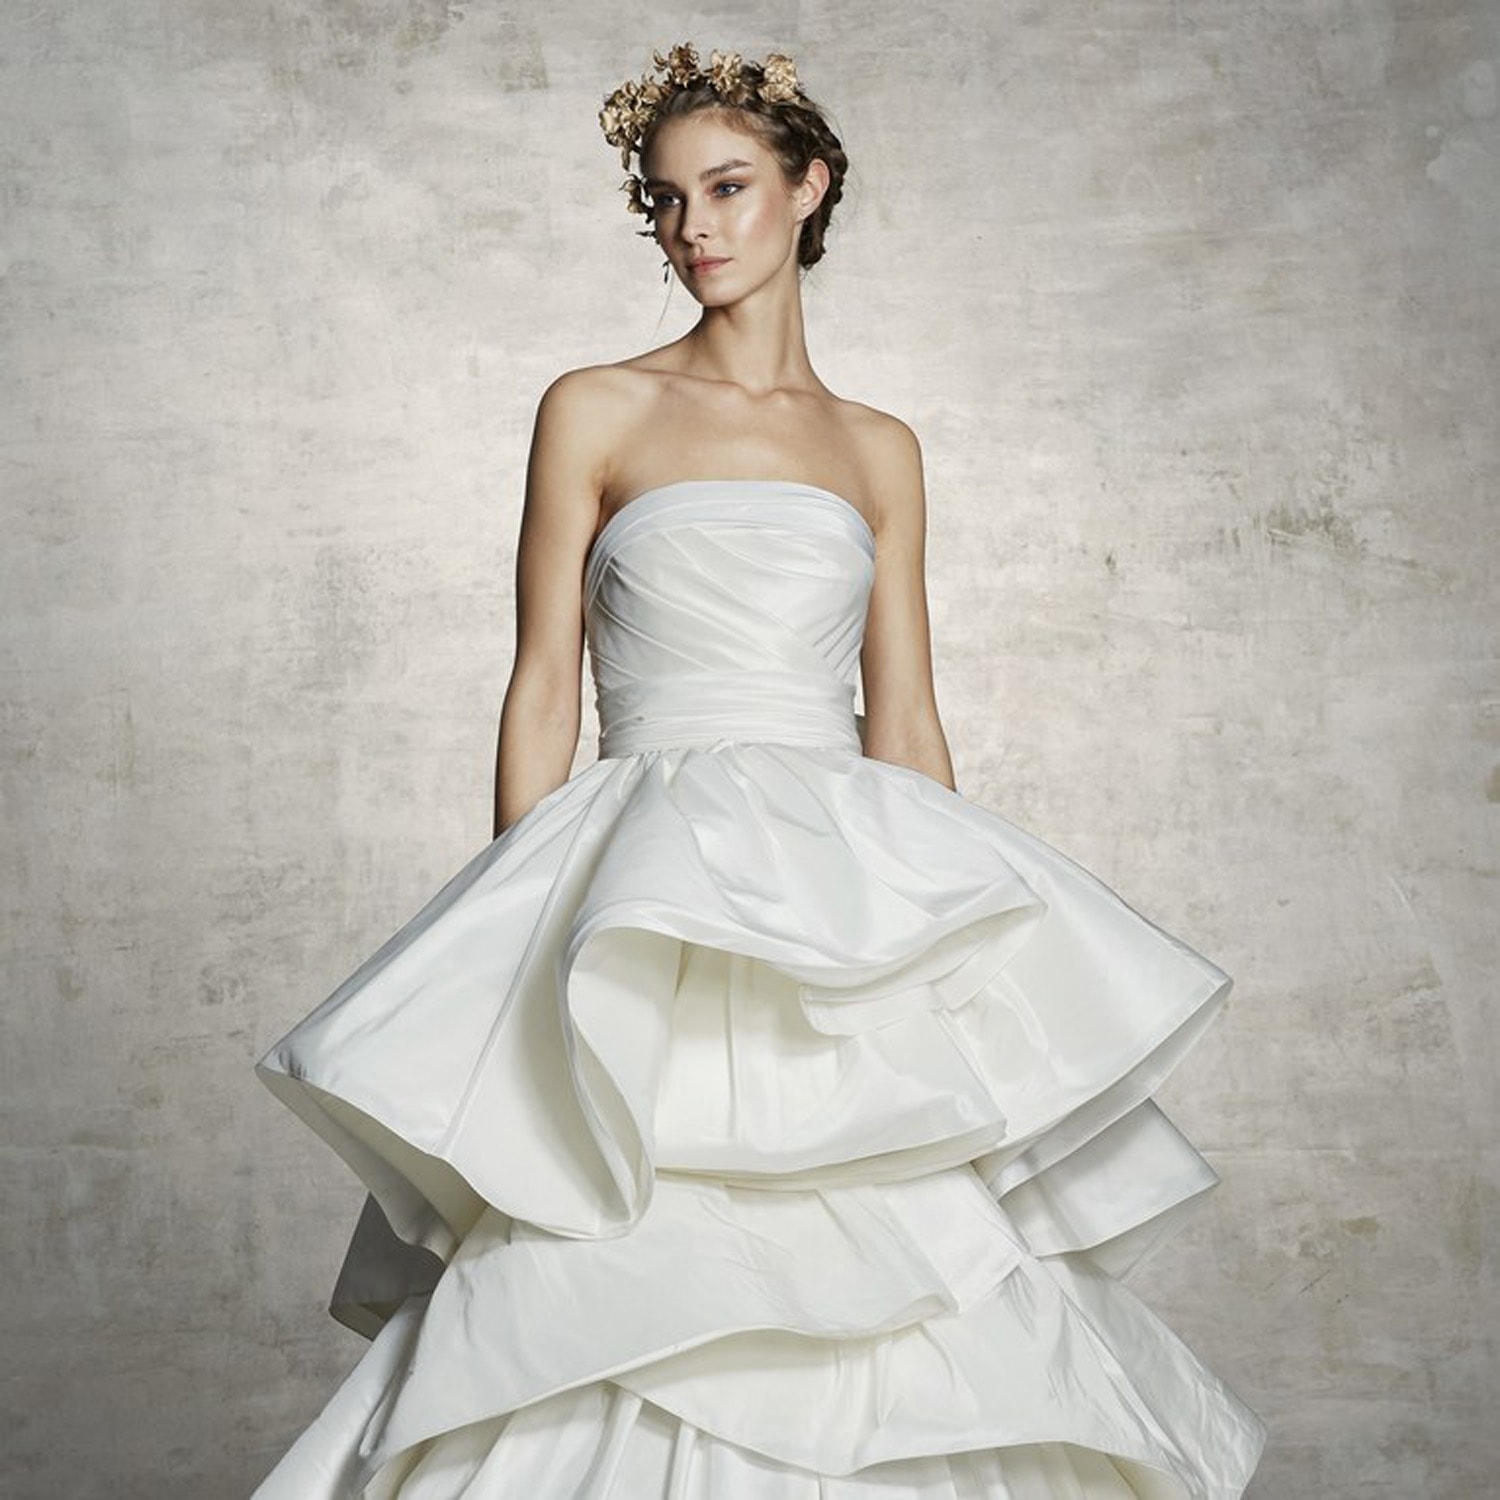 Couture Wedding Gowns by Marchesa | Dimitra's Bridal - Chicago, IL